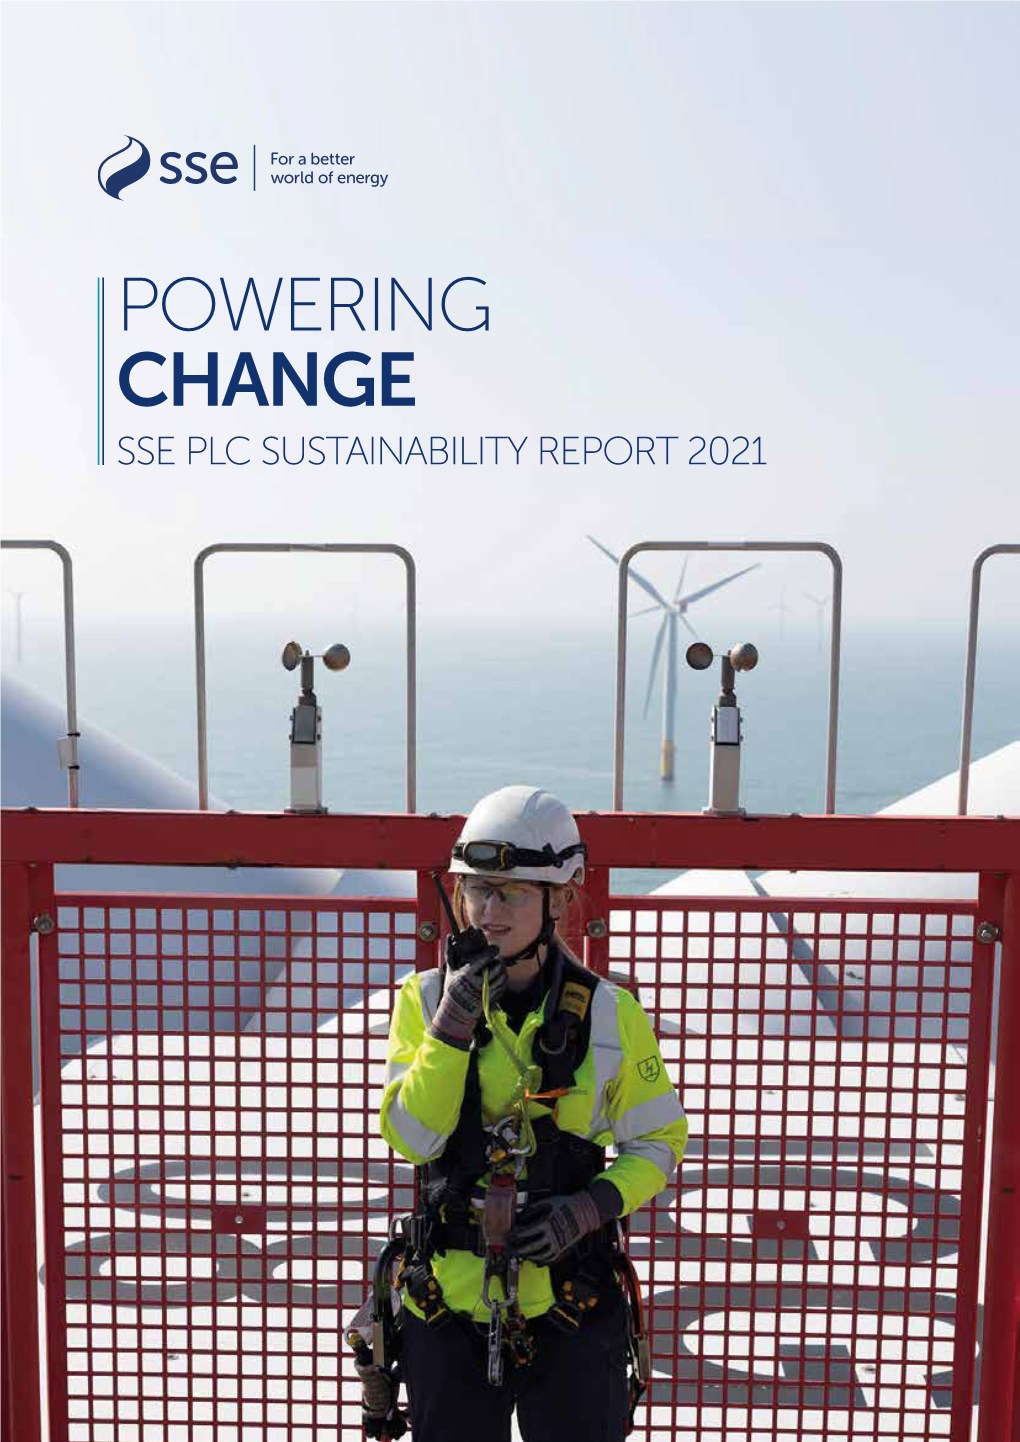 Powering Change Sse Plc Sustainability Report 2021 the Year in Numbers